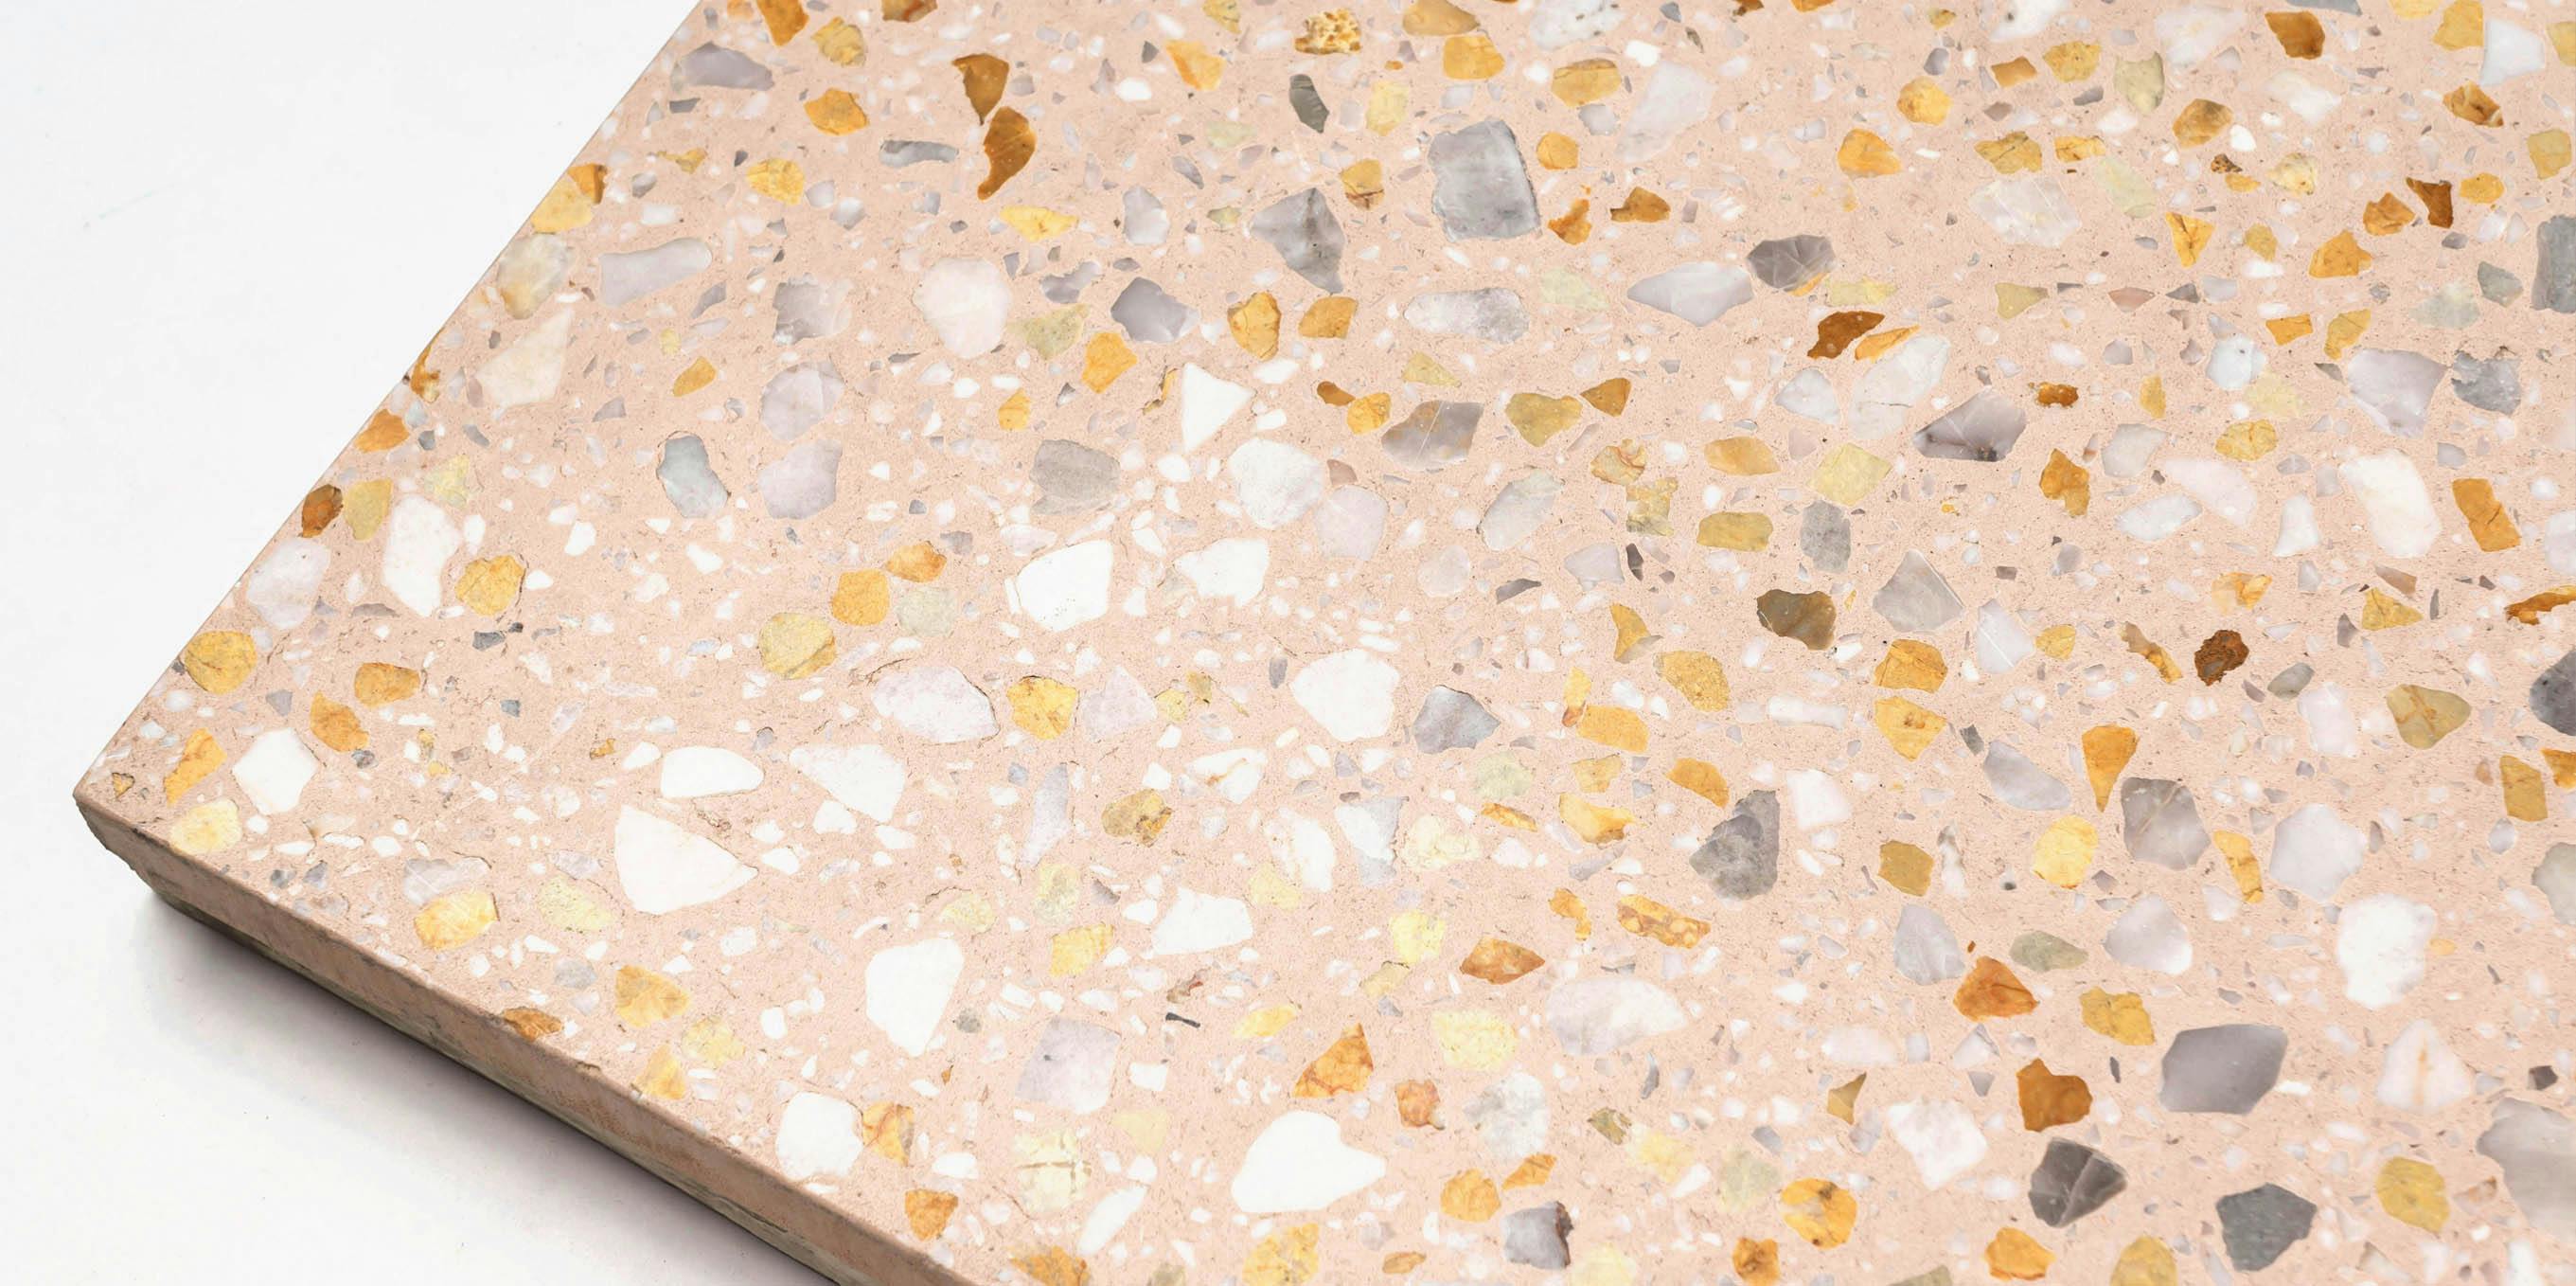 Terrazzo Tile collection featured image.